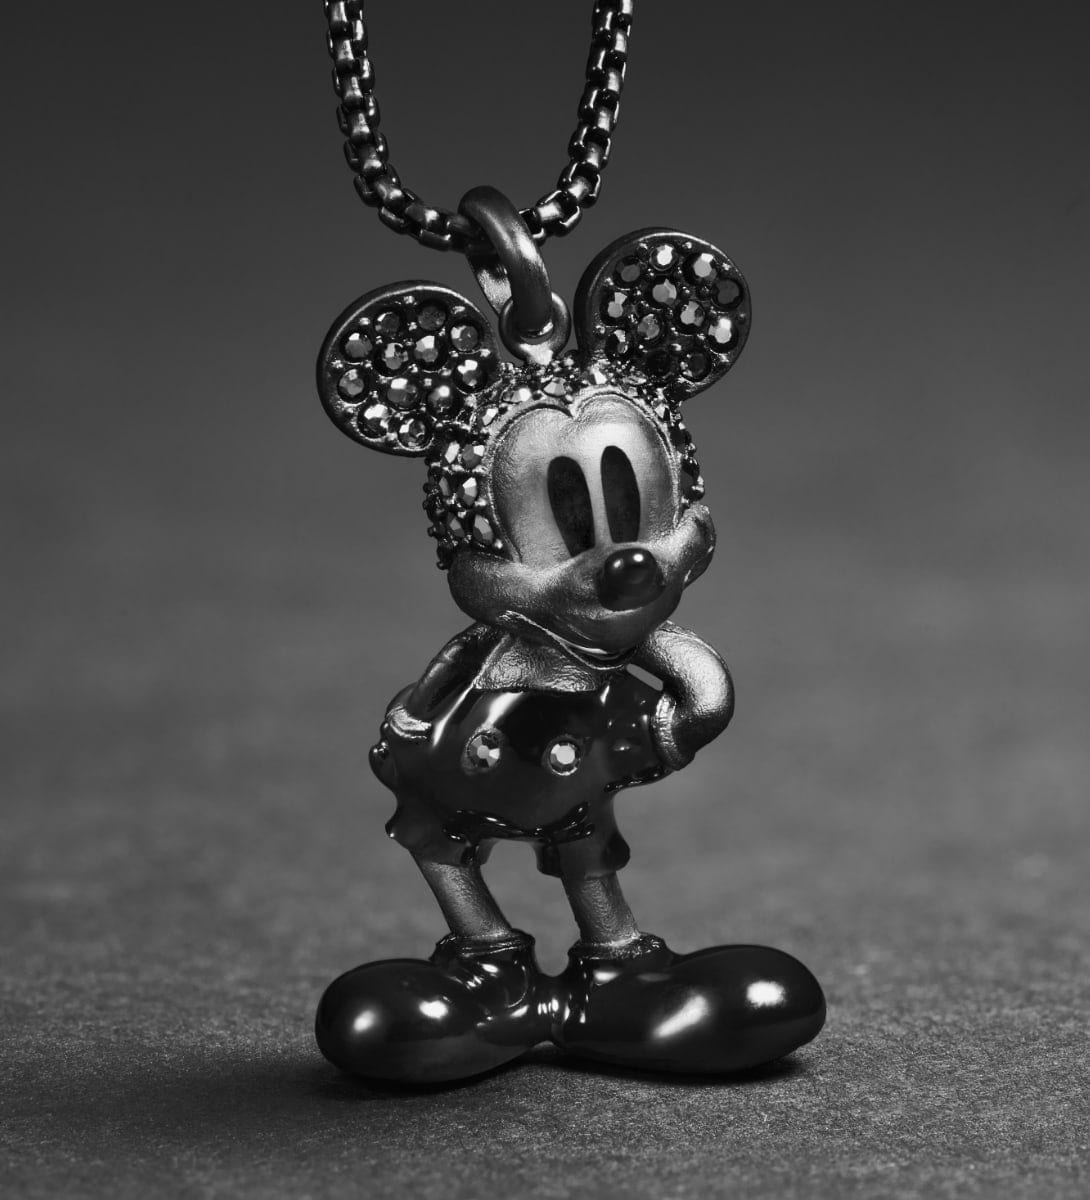 An animated GIF of two images. The first image features an all-black Mickey Mouse figurine pendant necklace studded with black hematite crystals. The second image showcases a gold-tone pendant of Minnie Mouse's profile, accented with crystals.